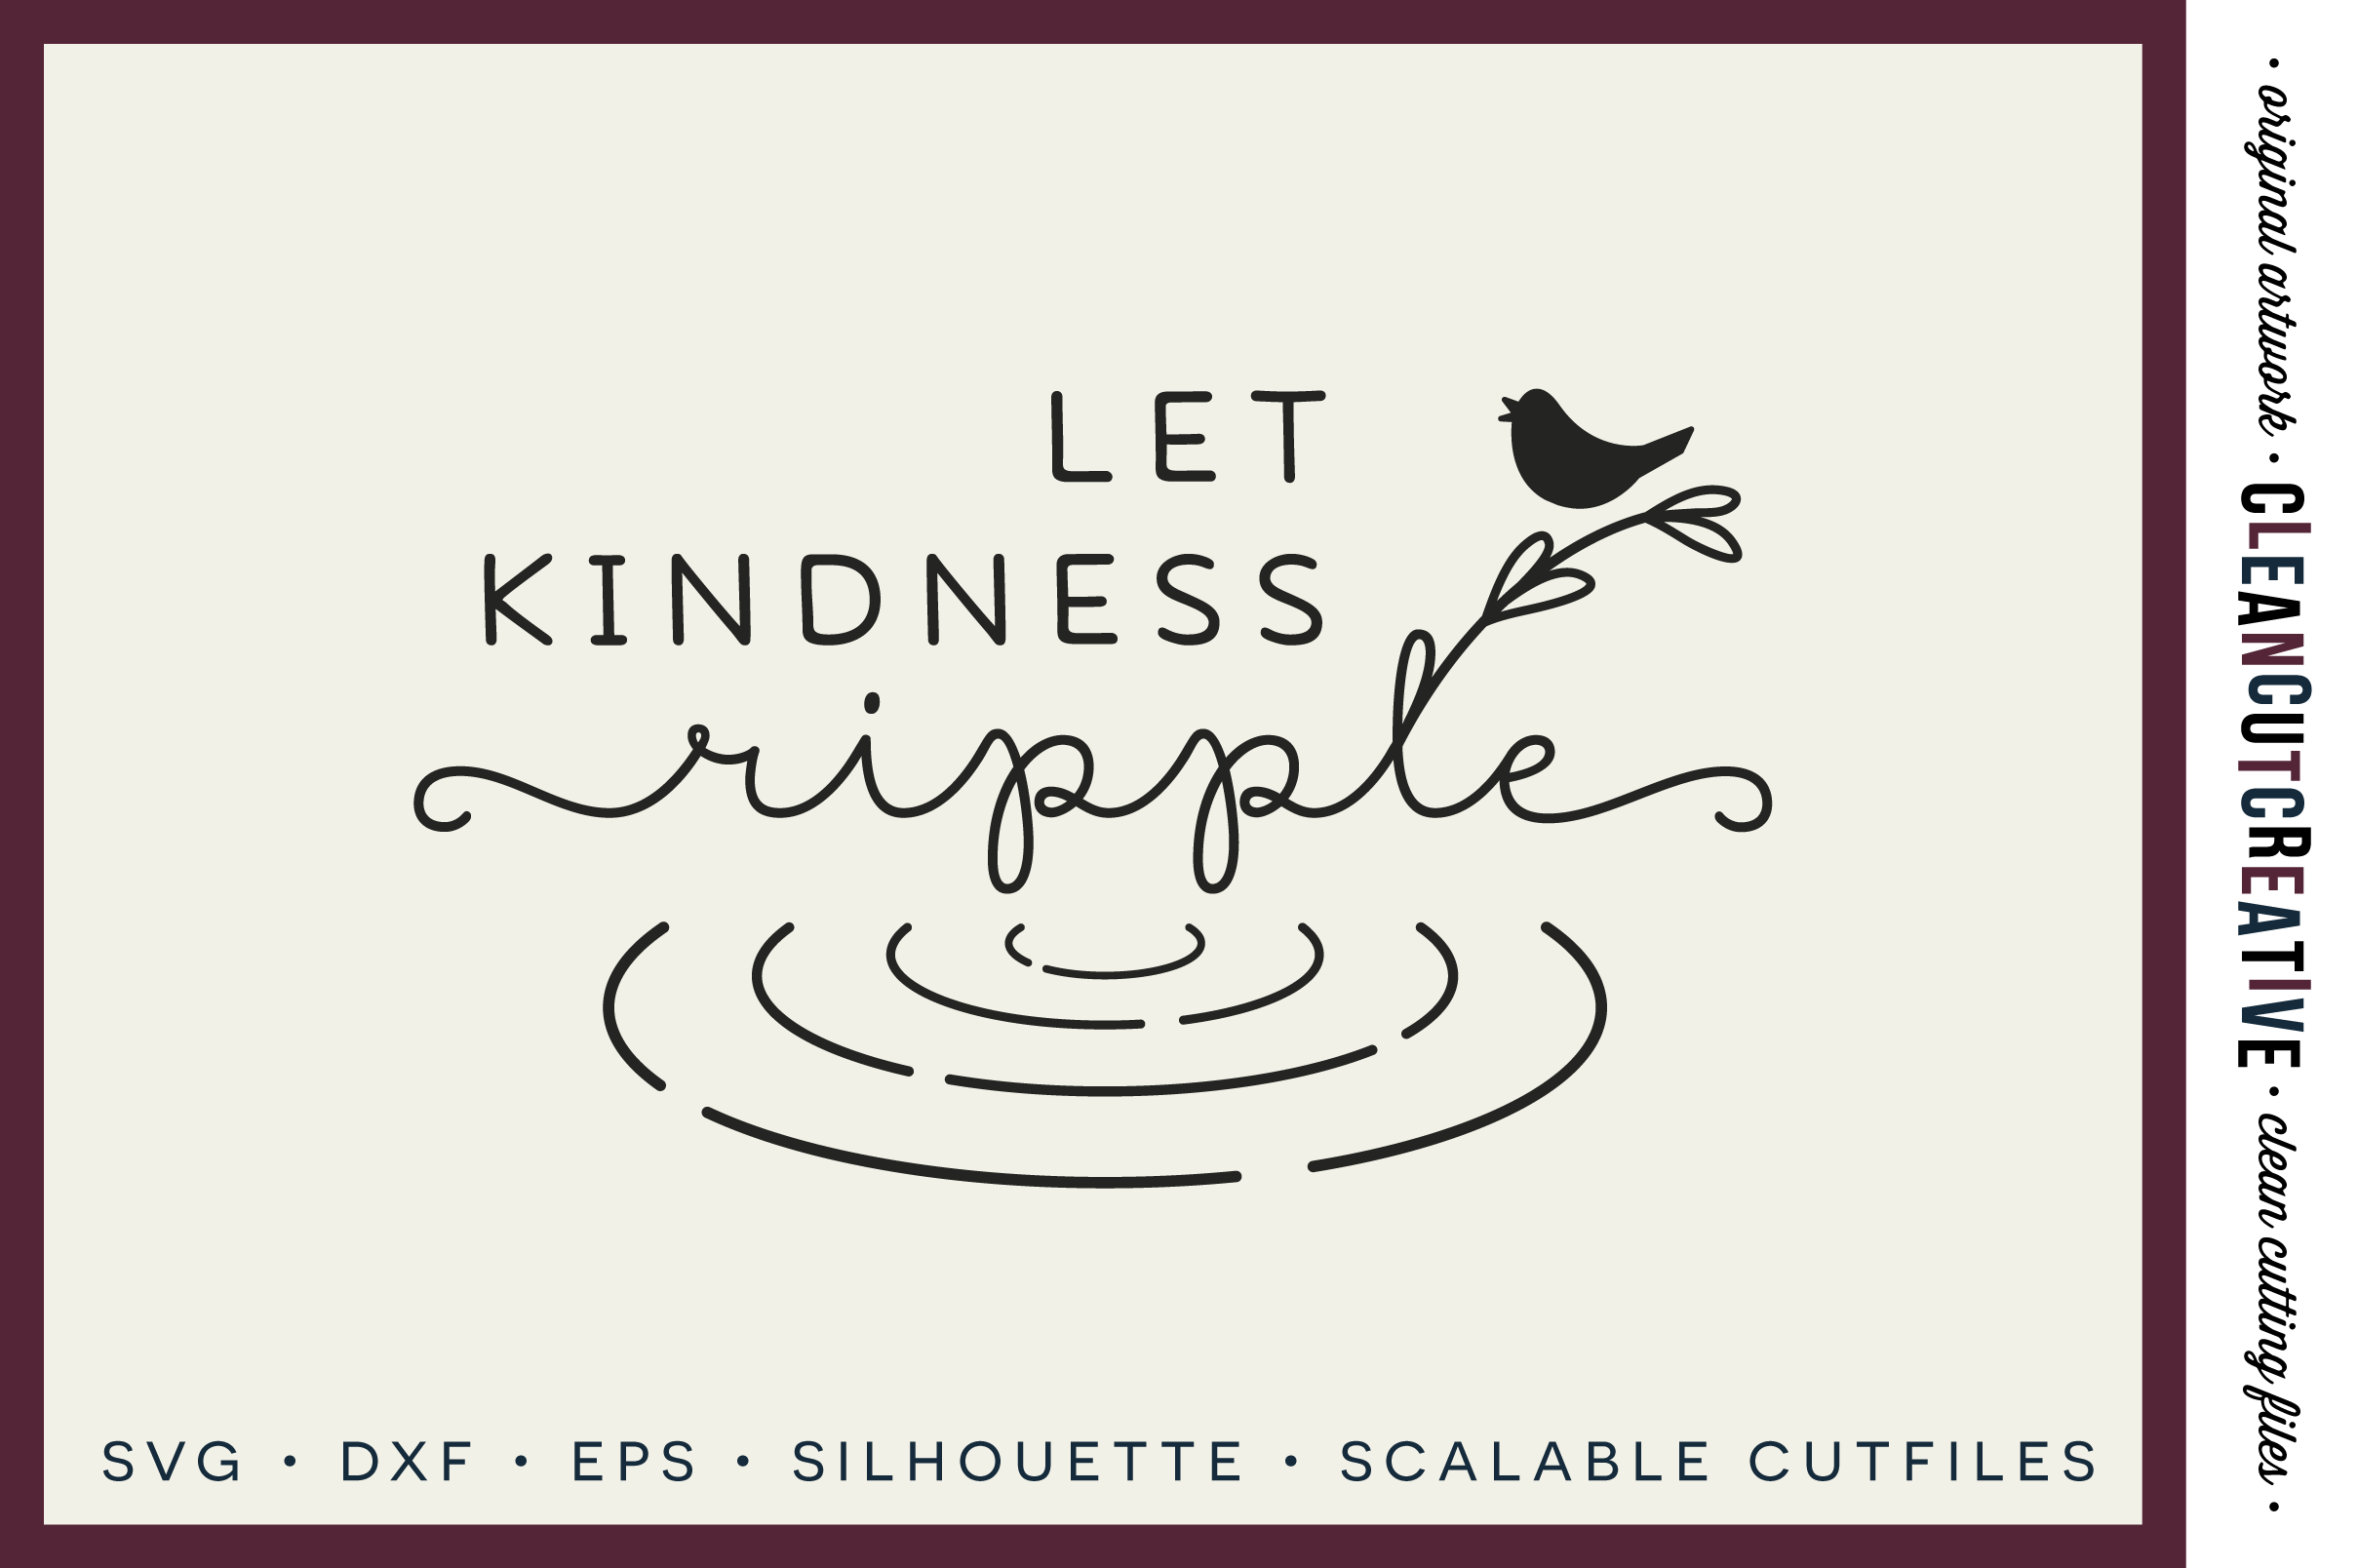 Download Inspiring Quote - Let Kindness Ripple - SVG DXF EPS PNG ...